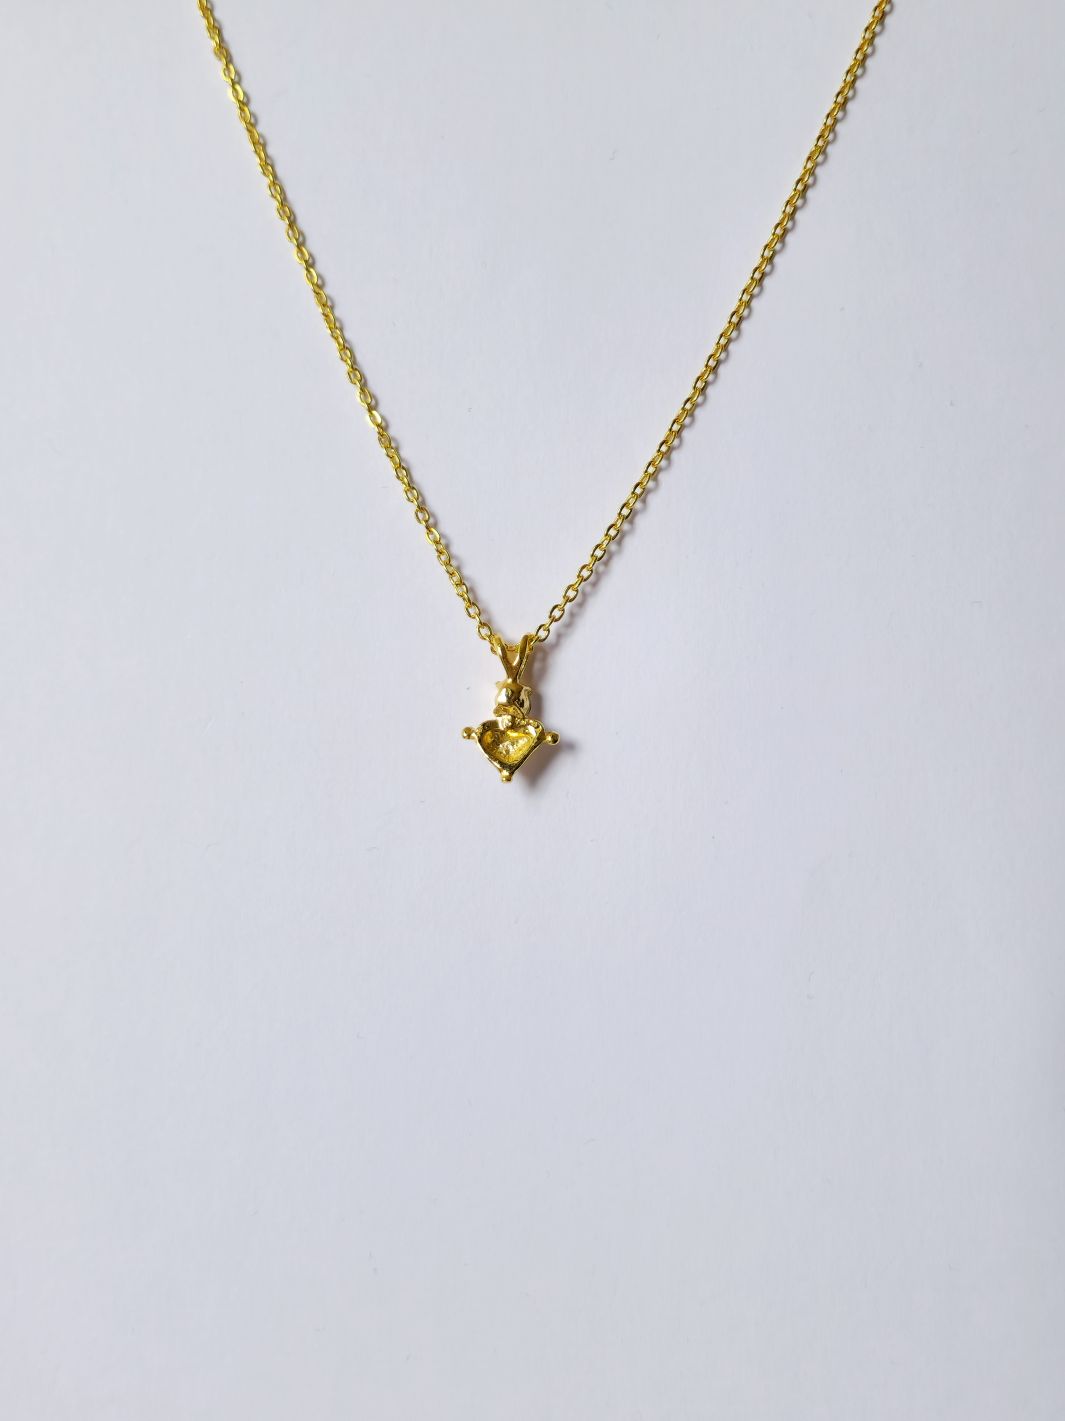 Vintage Gold Plated Thin Cable Chain Pendant Necklace with Heart Charm